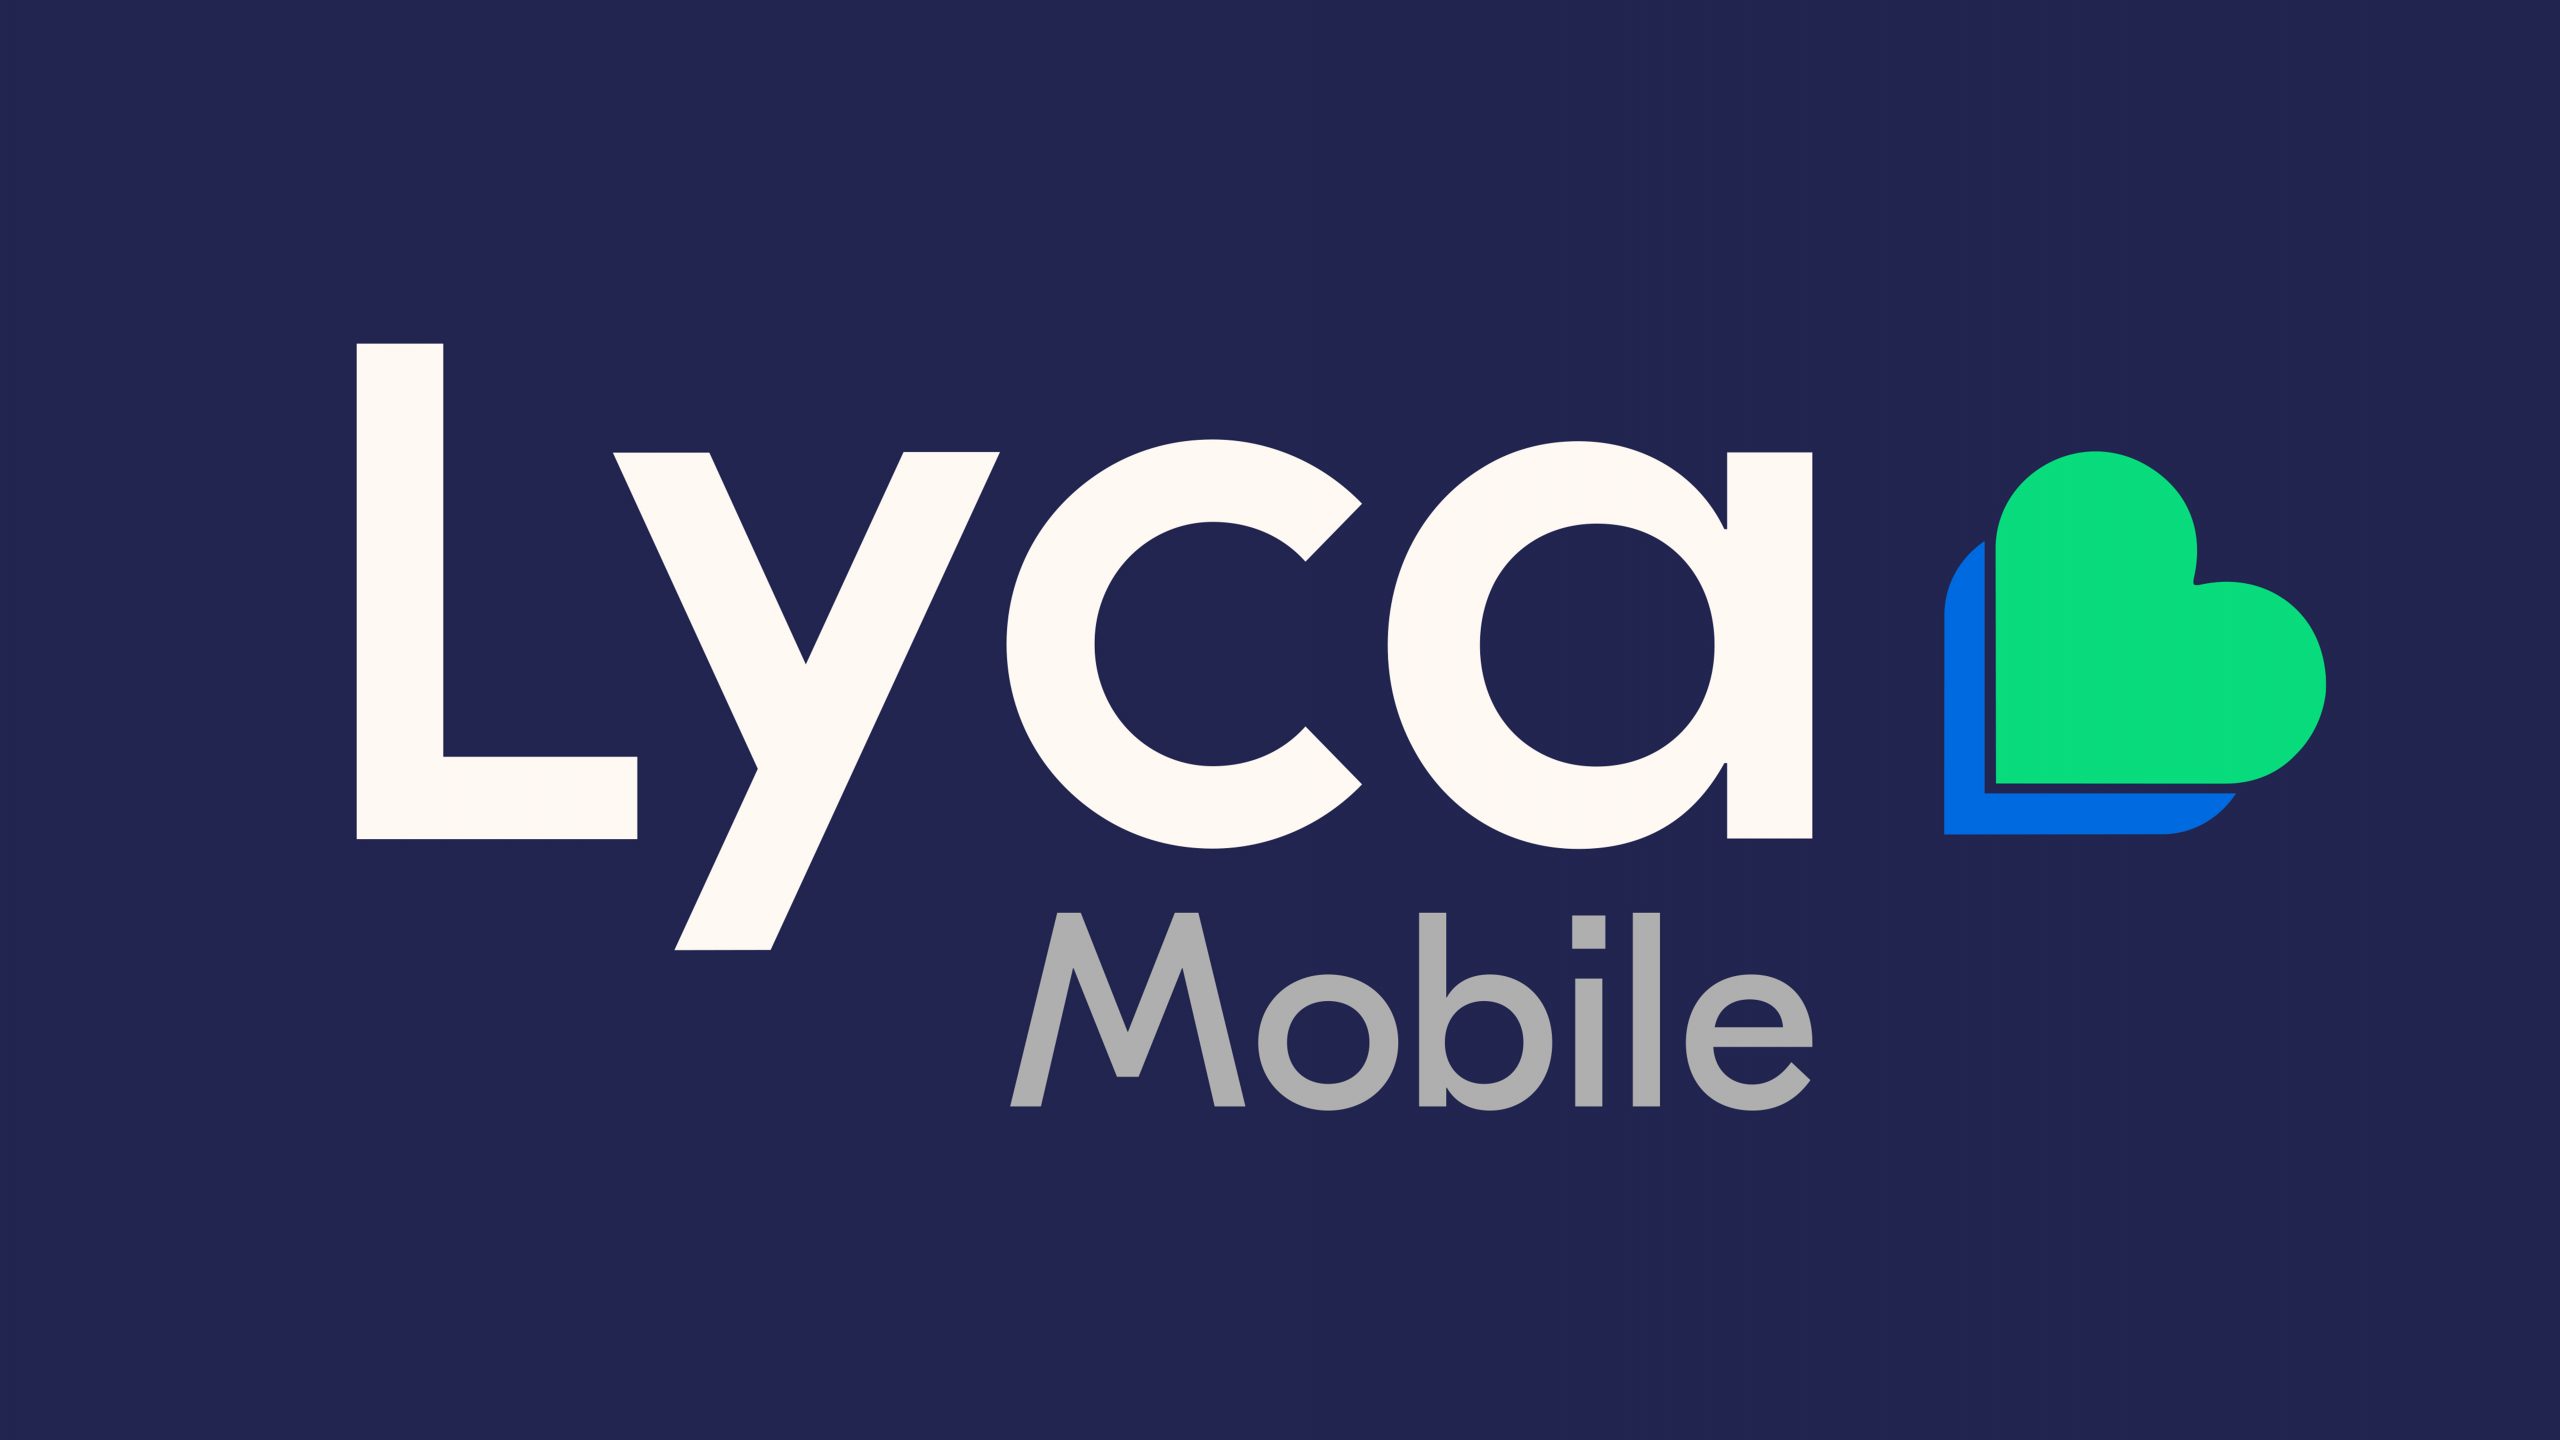 Netizens react to the Lyca Mobile data price changes. 